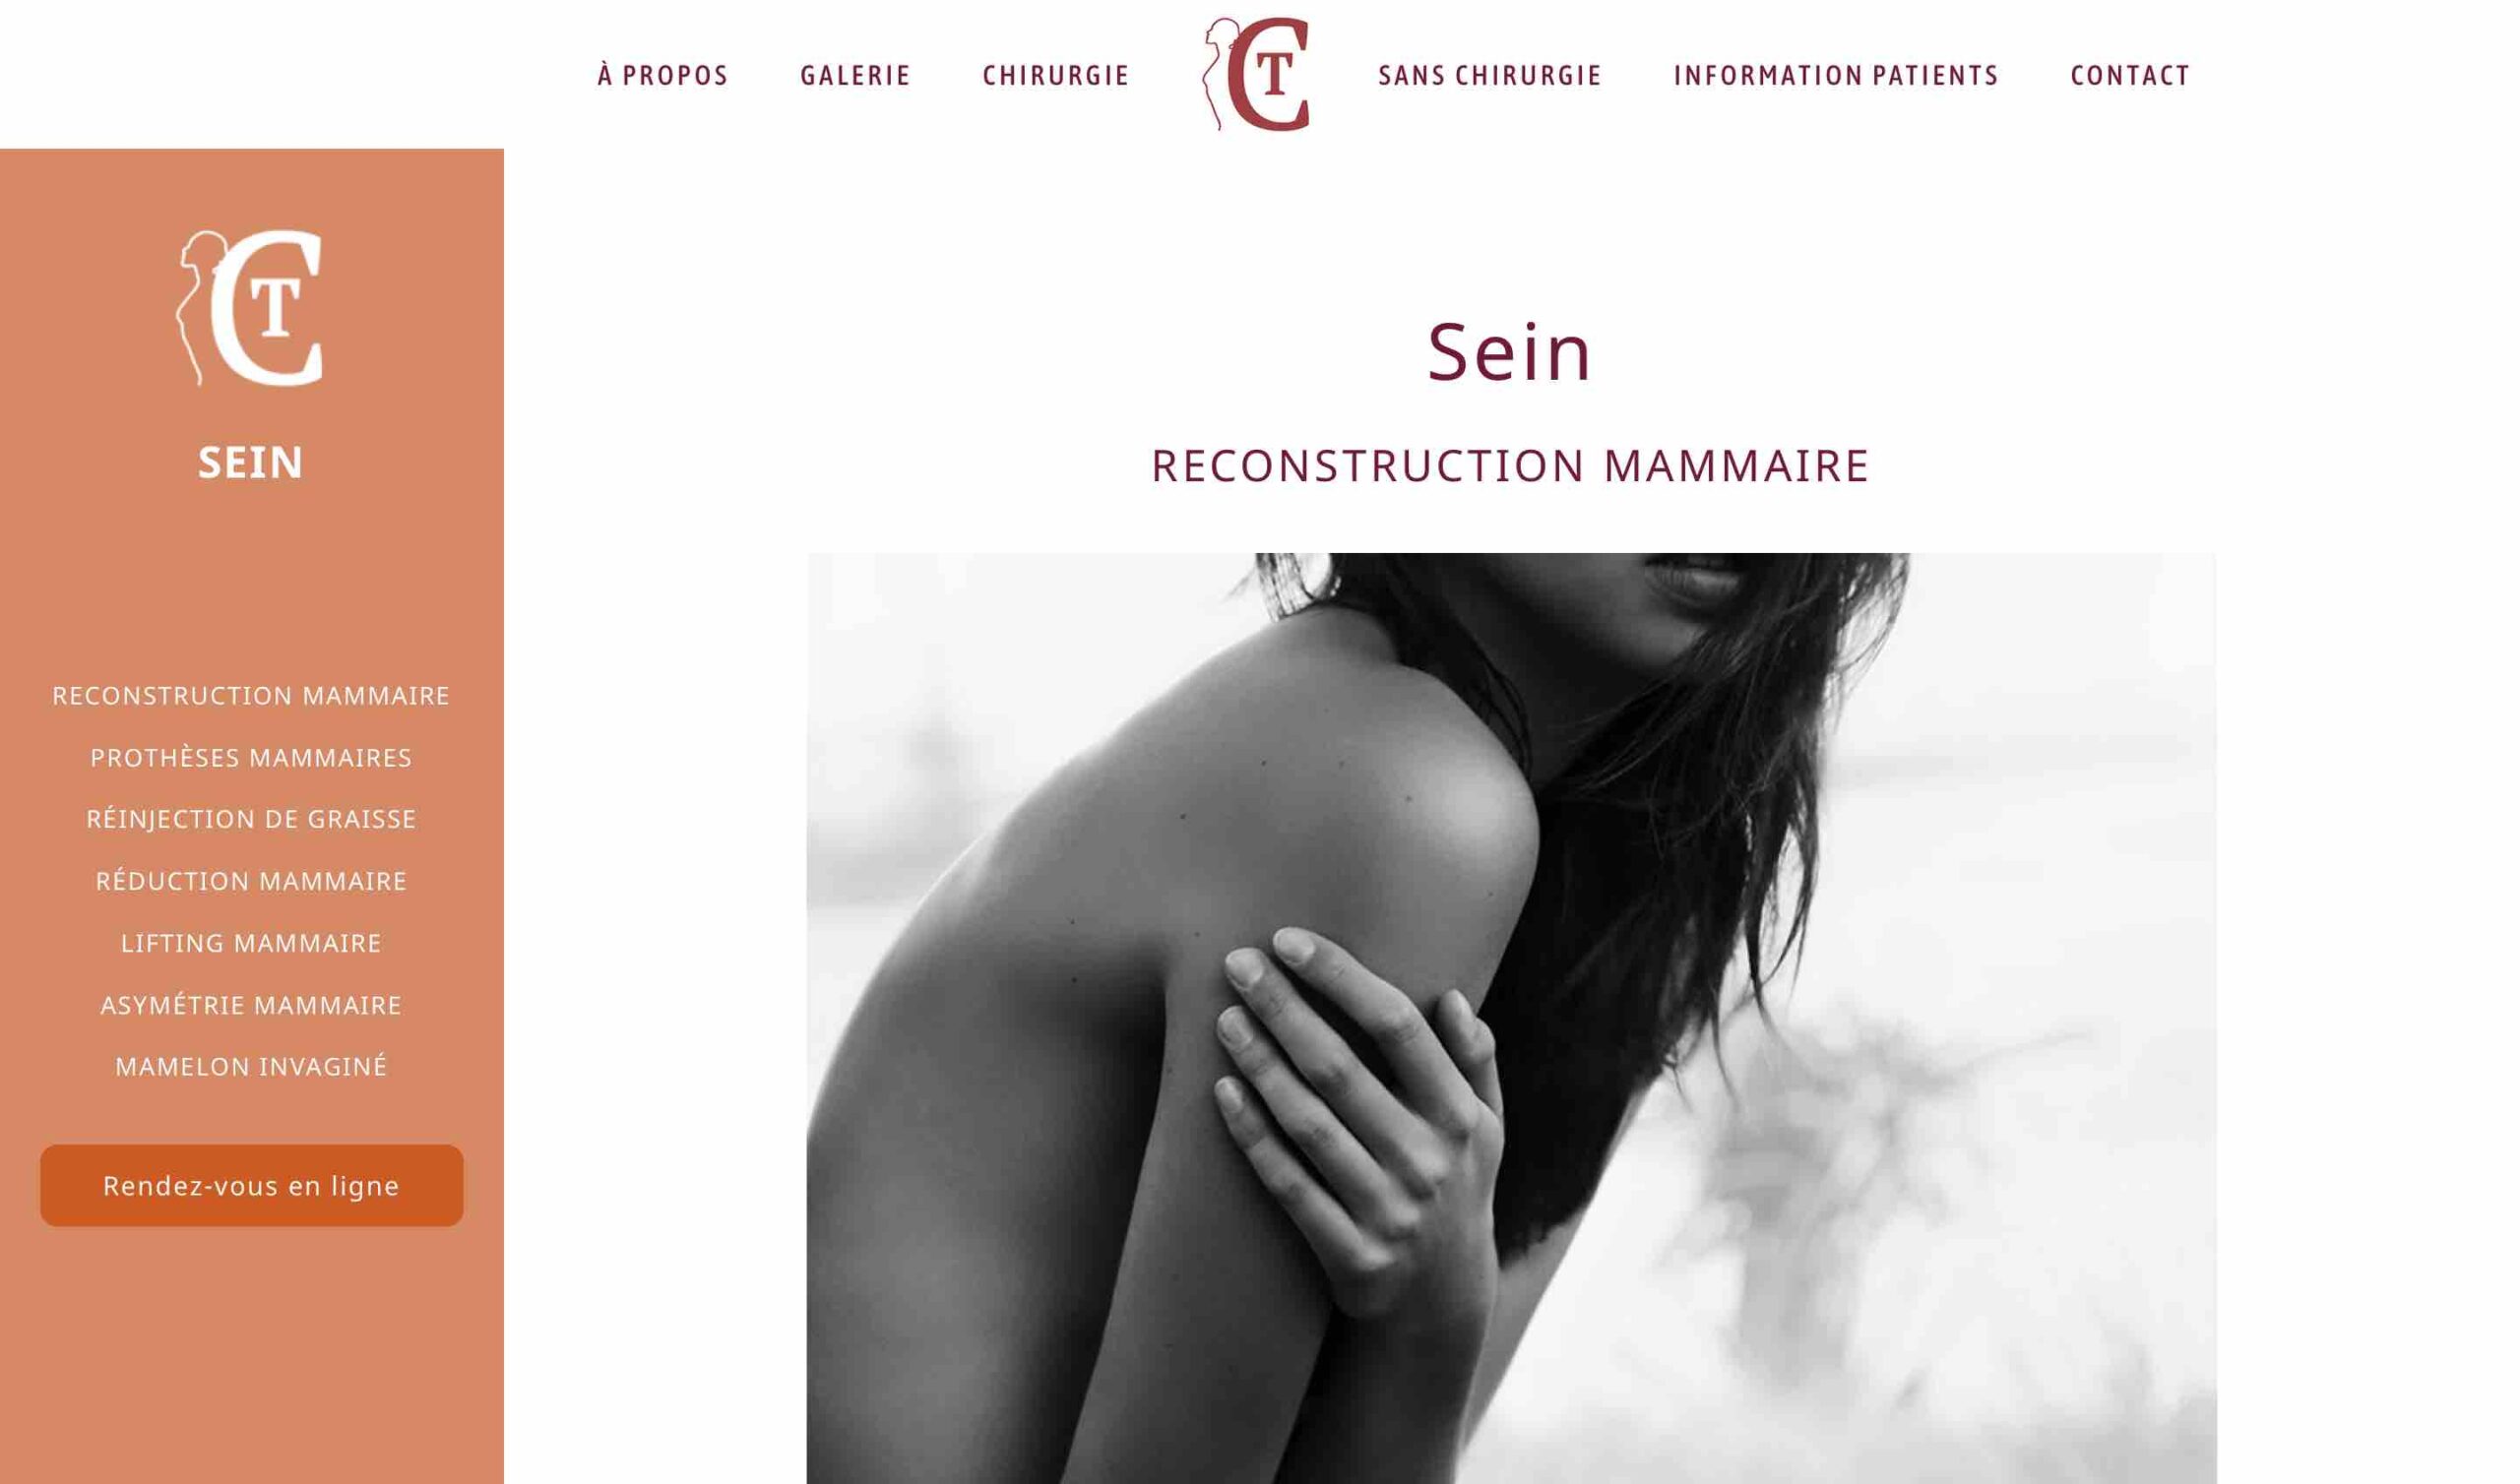 ANGELIQUE DAMOUR - projet DR COLSON - page chirurgie seins